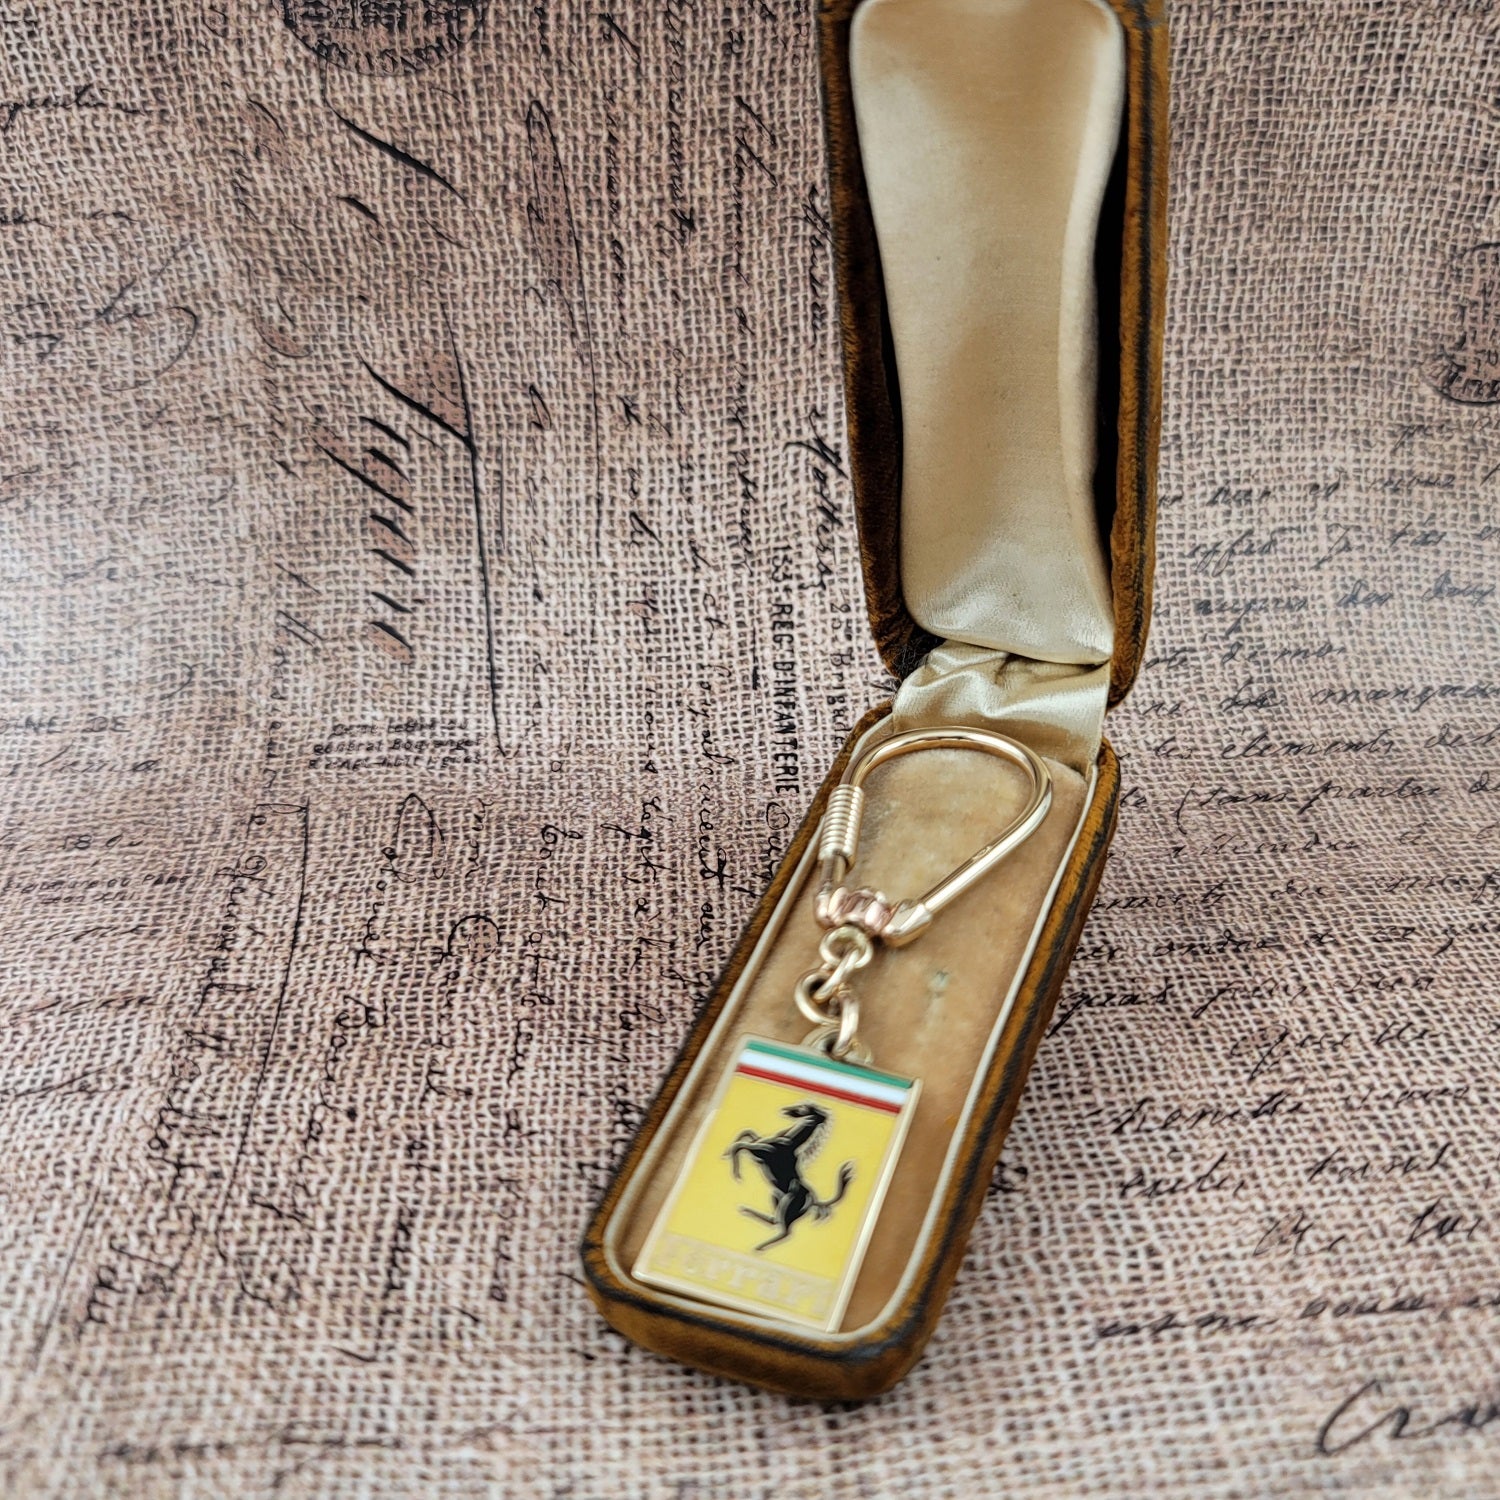 SUPER RARE Vintage Ferrari Key Chain Hand Crafted in 14K Gold  Peters Vaults